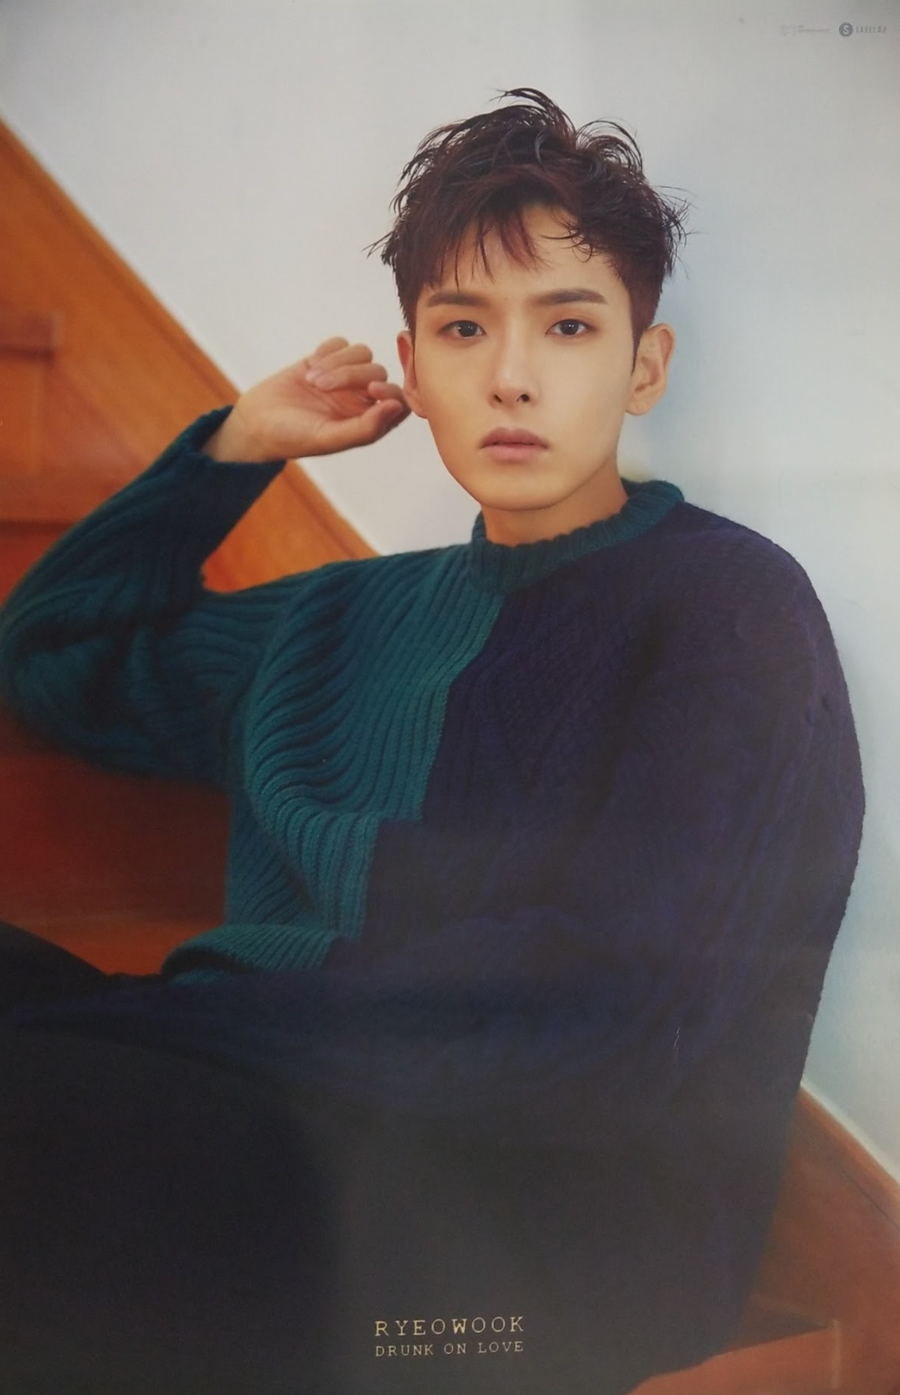 Ryeowook 2nd Mini Album Drunk On Love Official Poster - Photo Concept 1